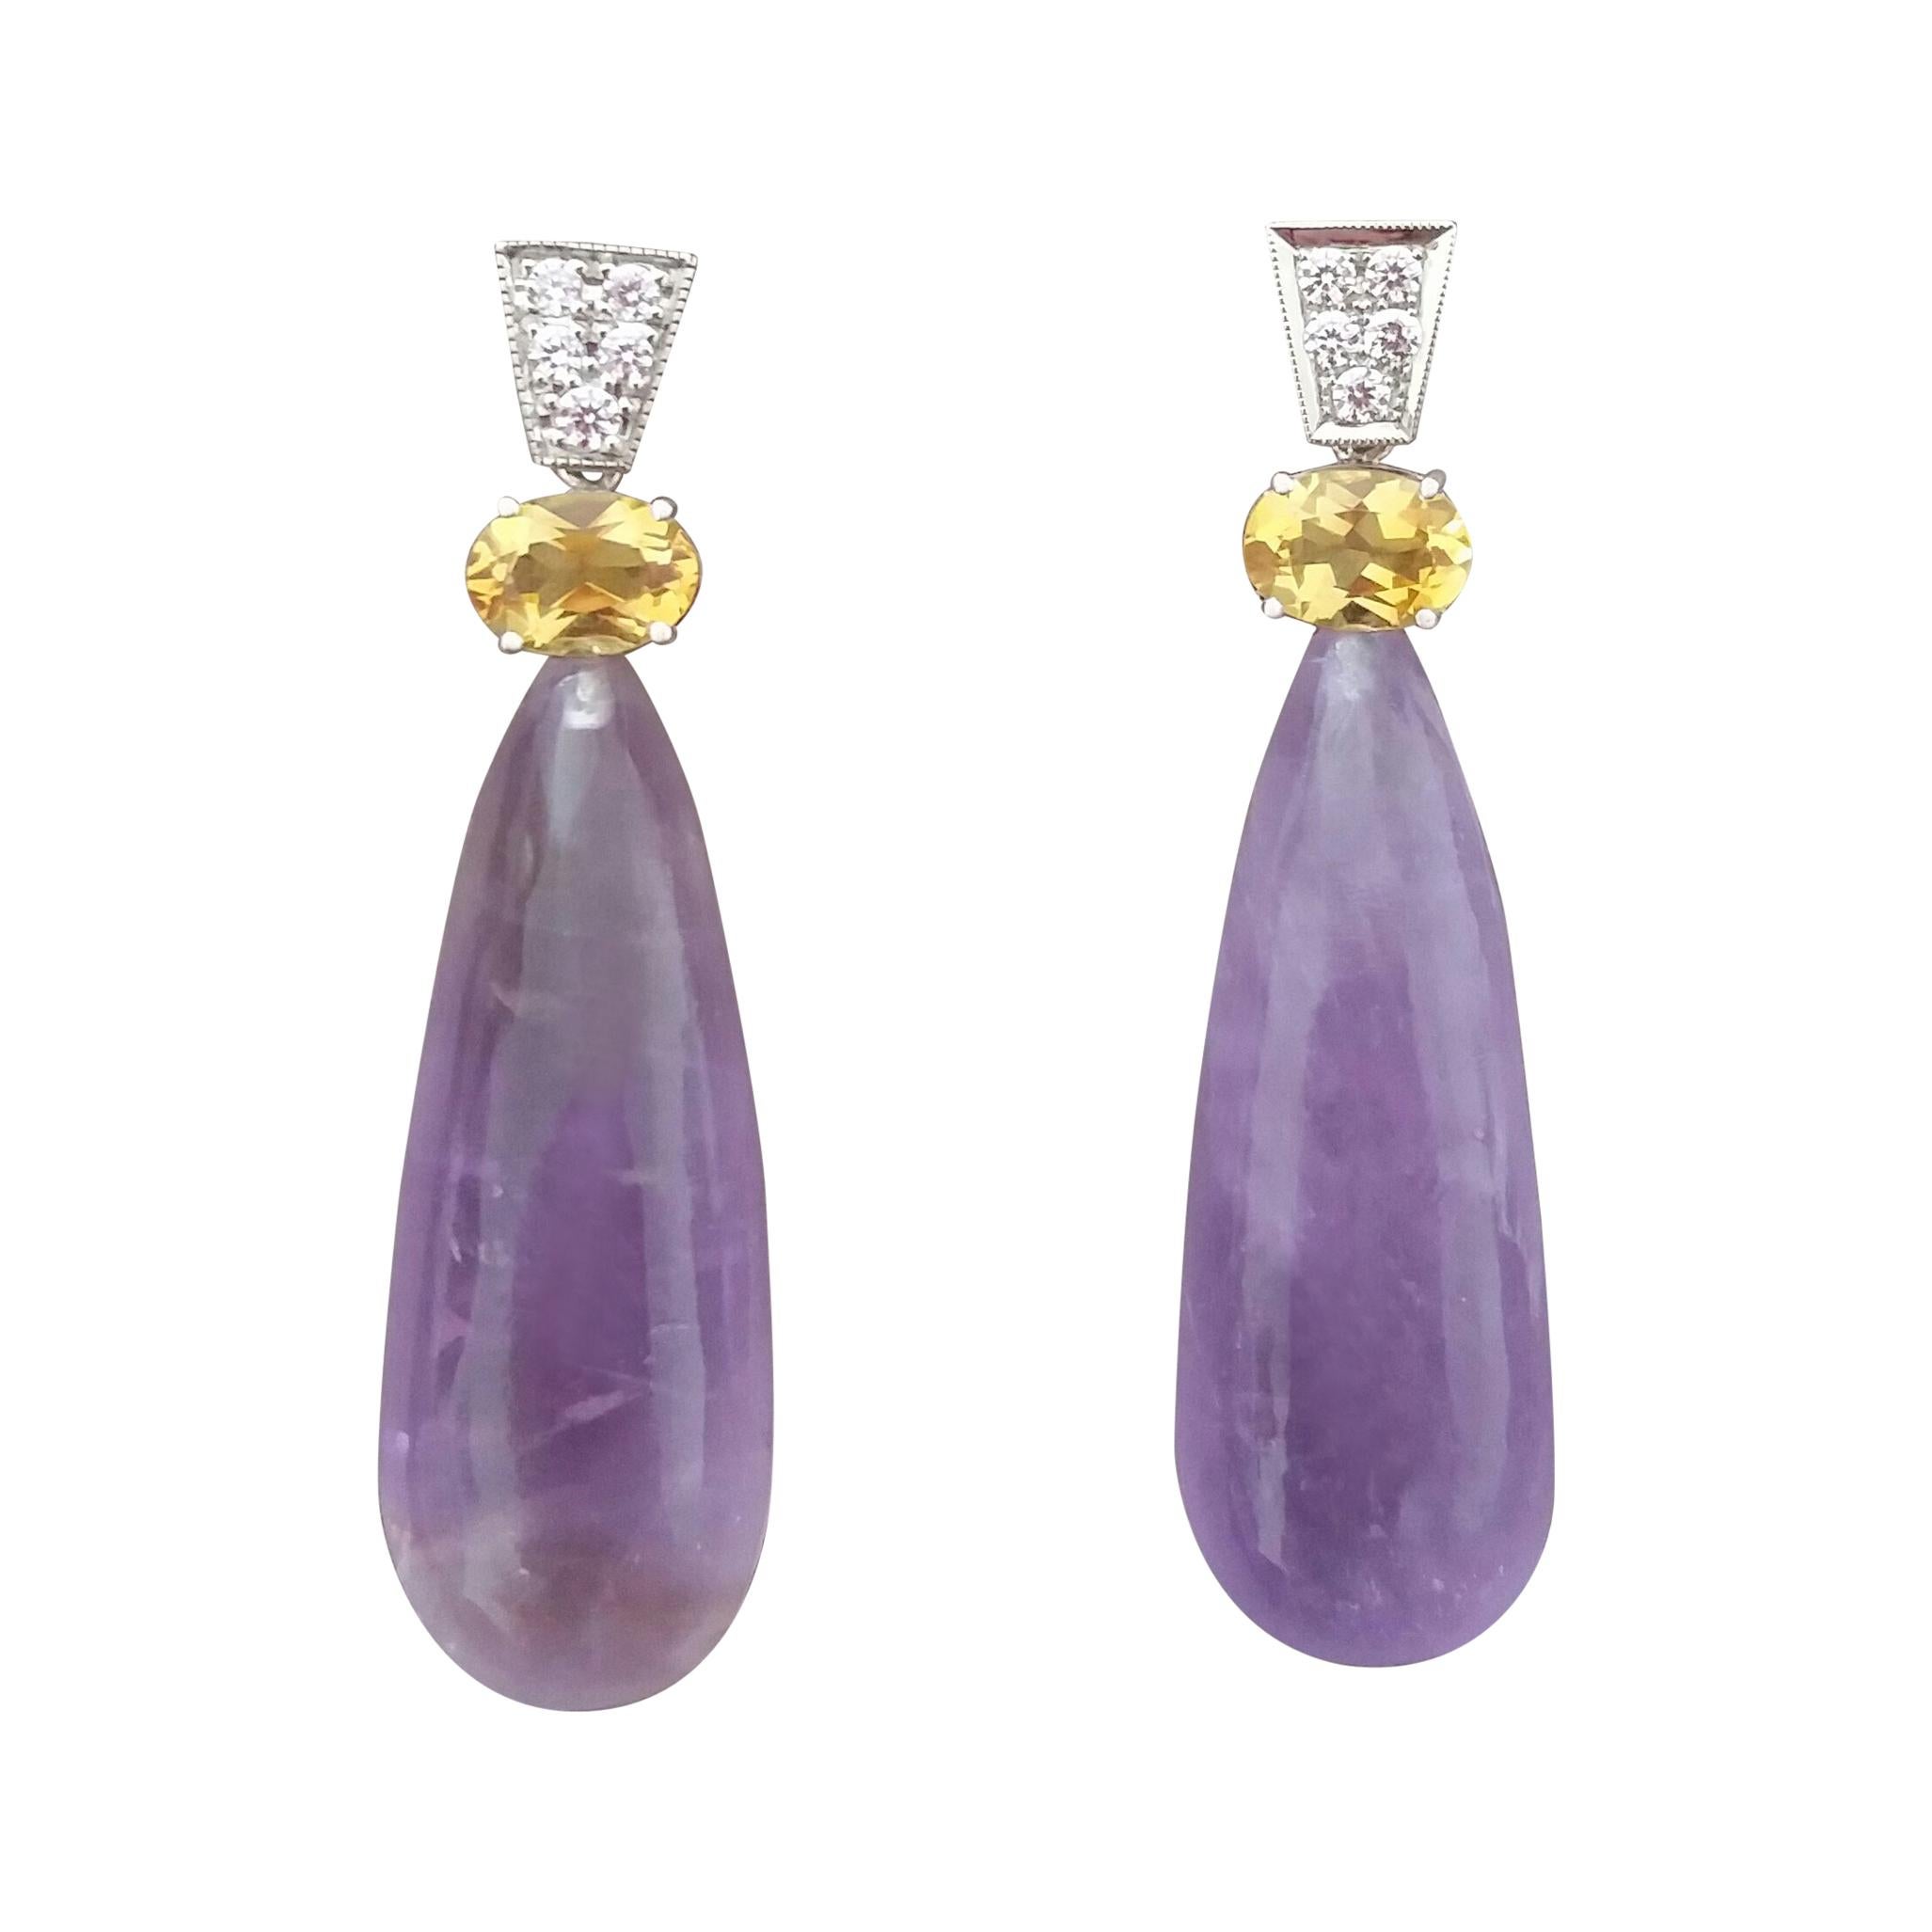 Art Deco Style Faceted Citrine Diamonds 14 Kt White Gold Amethyst Drops Earrings For Sale